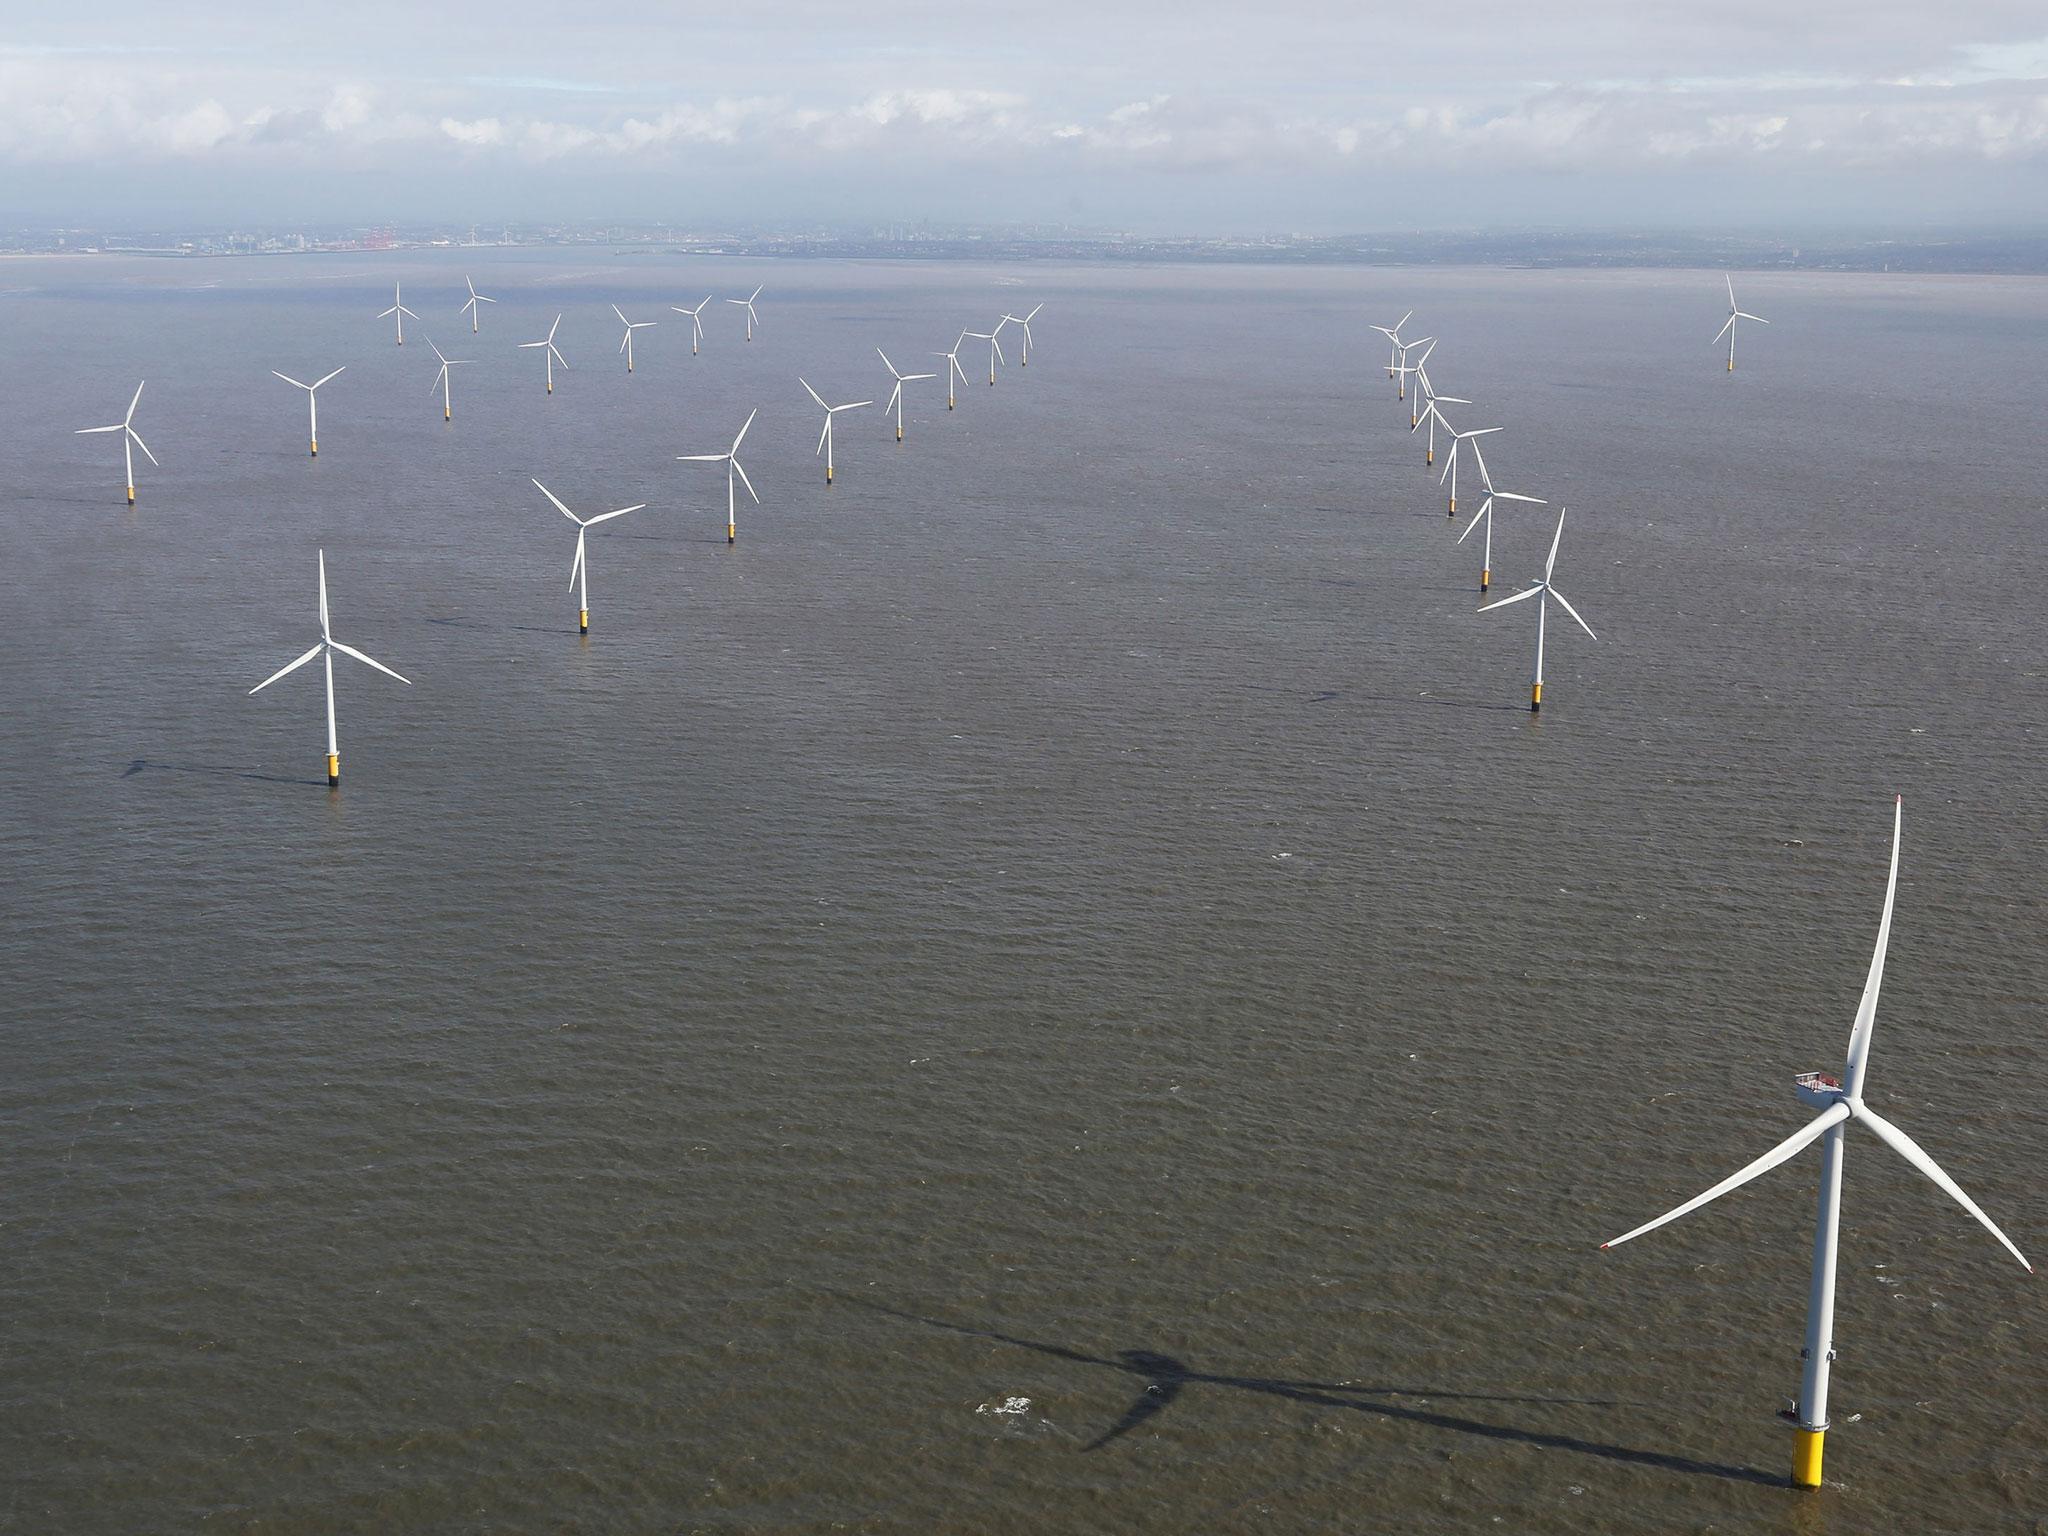 Blown away: scientists say the wind farm would have to operate in 'remote and harsh' conditions